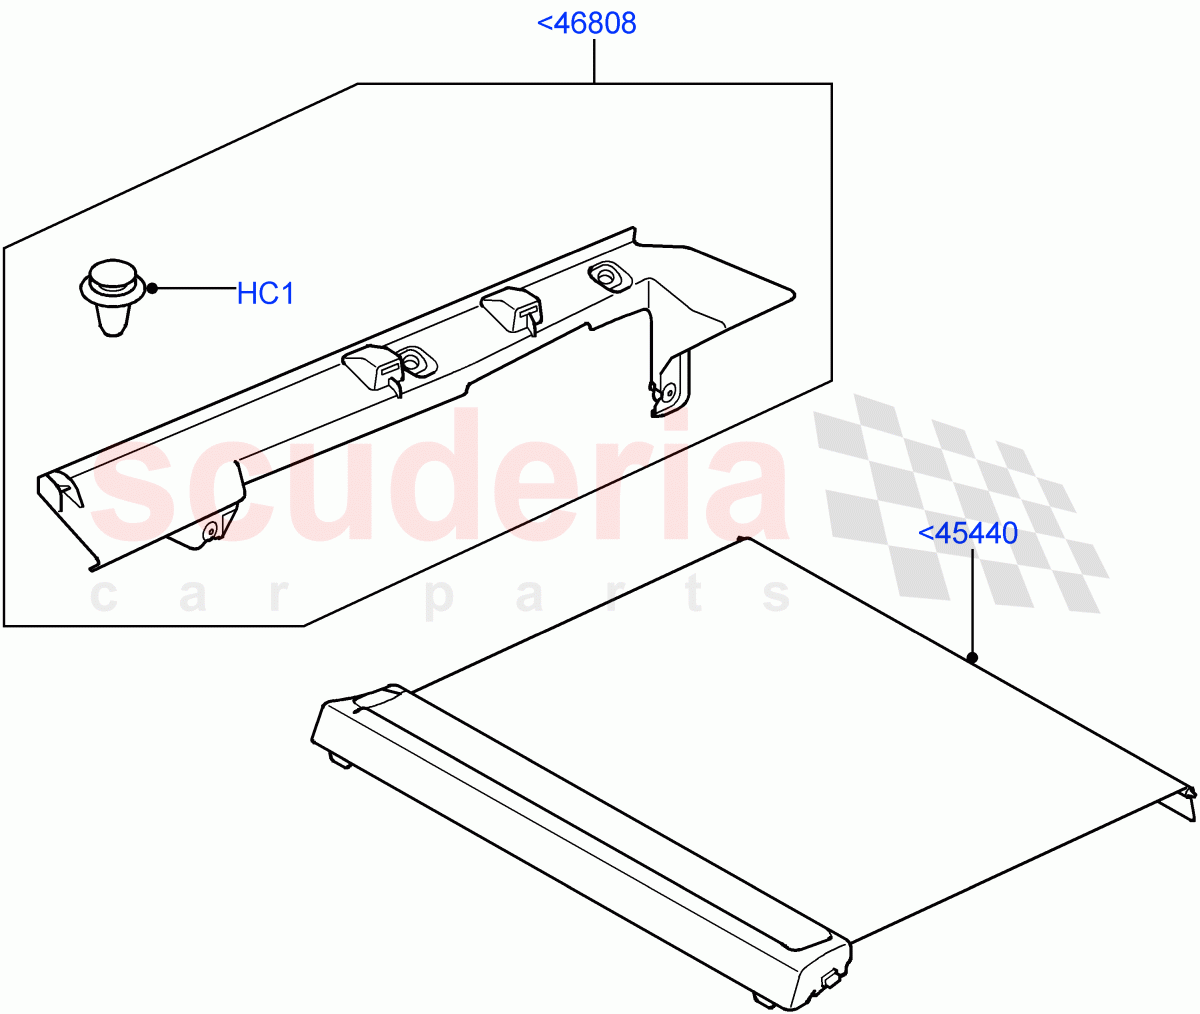 Load Compartment Trim(Package Tray)((V)FROMAA000001) of Land Rover Land Rover Discovery 4 (2010-2016) [5.0 OHC SGDI NA V8 Petrol]